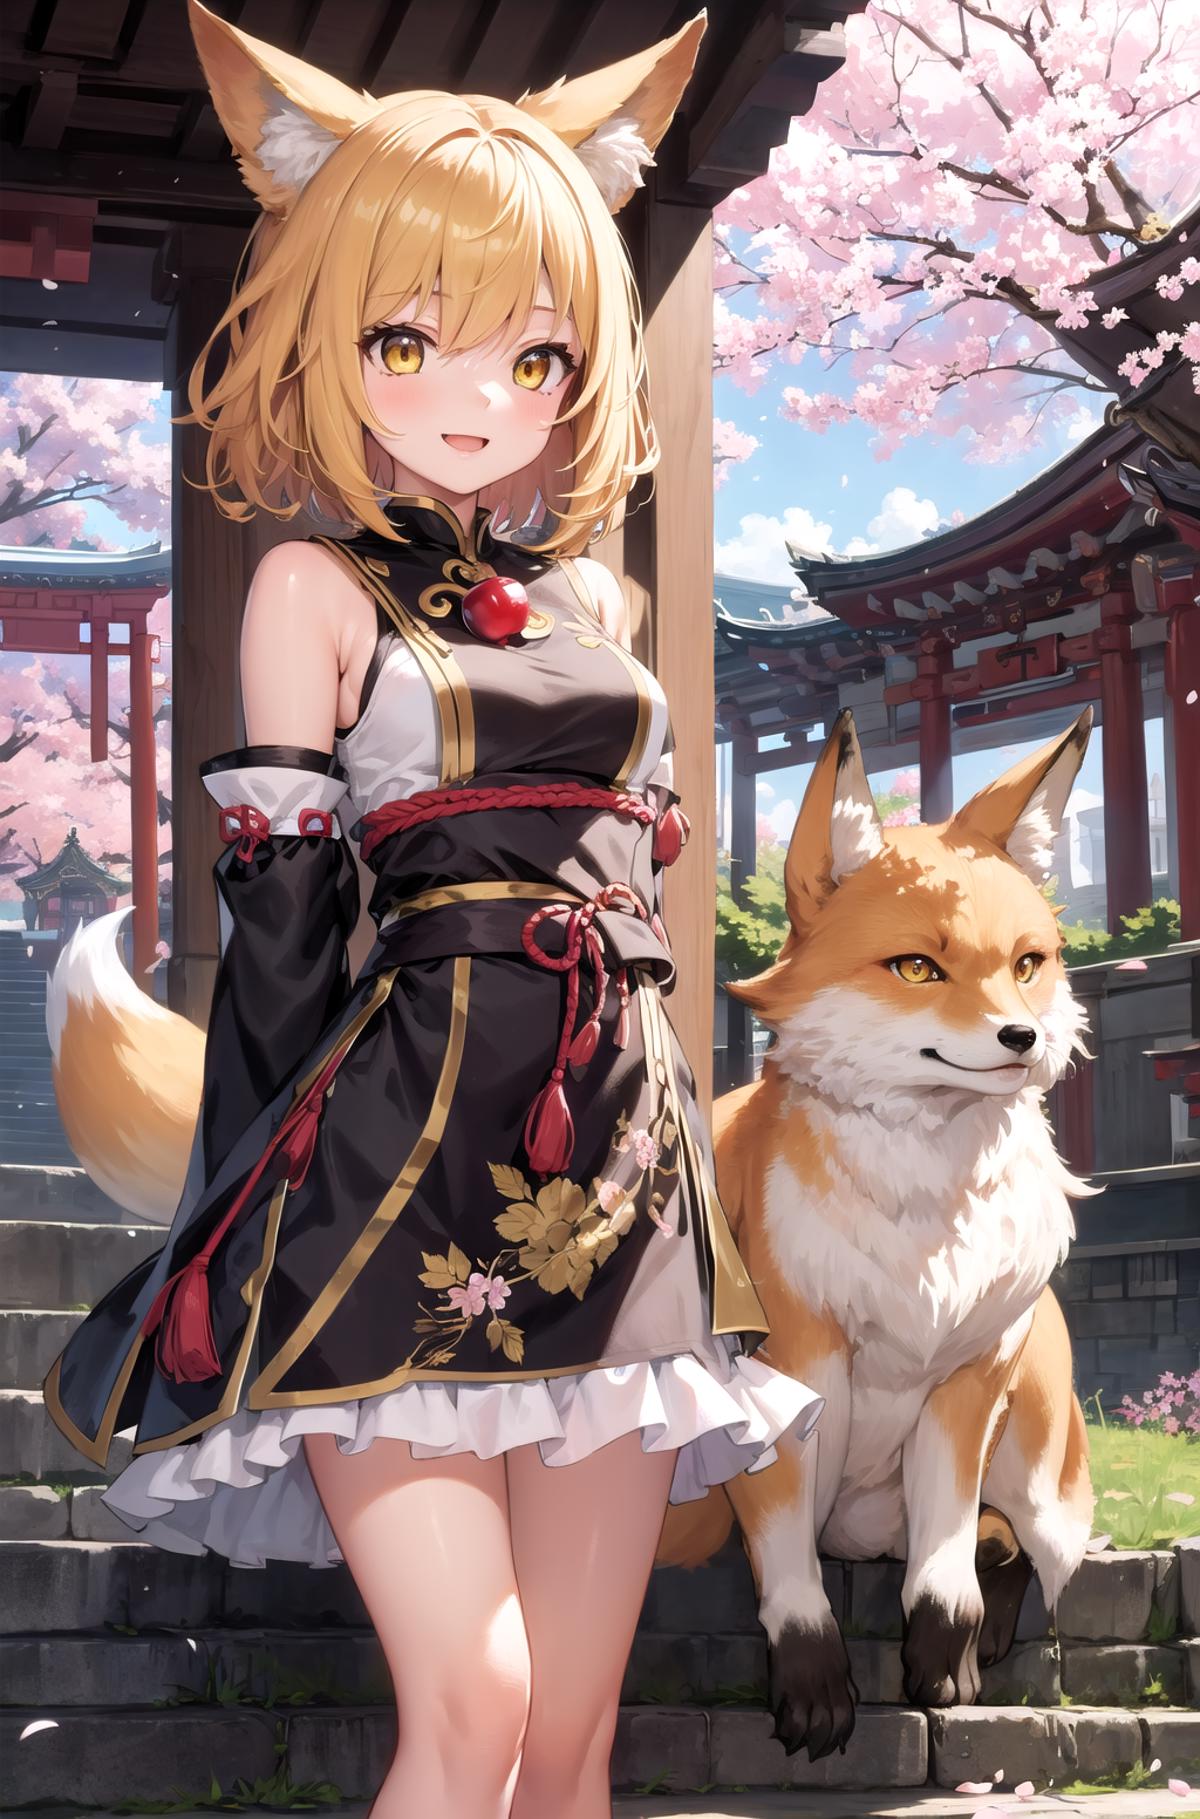 Anime girl posing next to a fox in a beautiful garden, with pink cherry blossoms in the background.